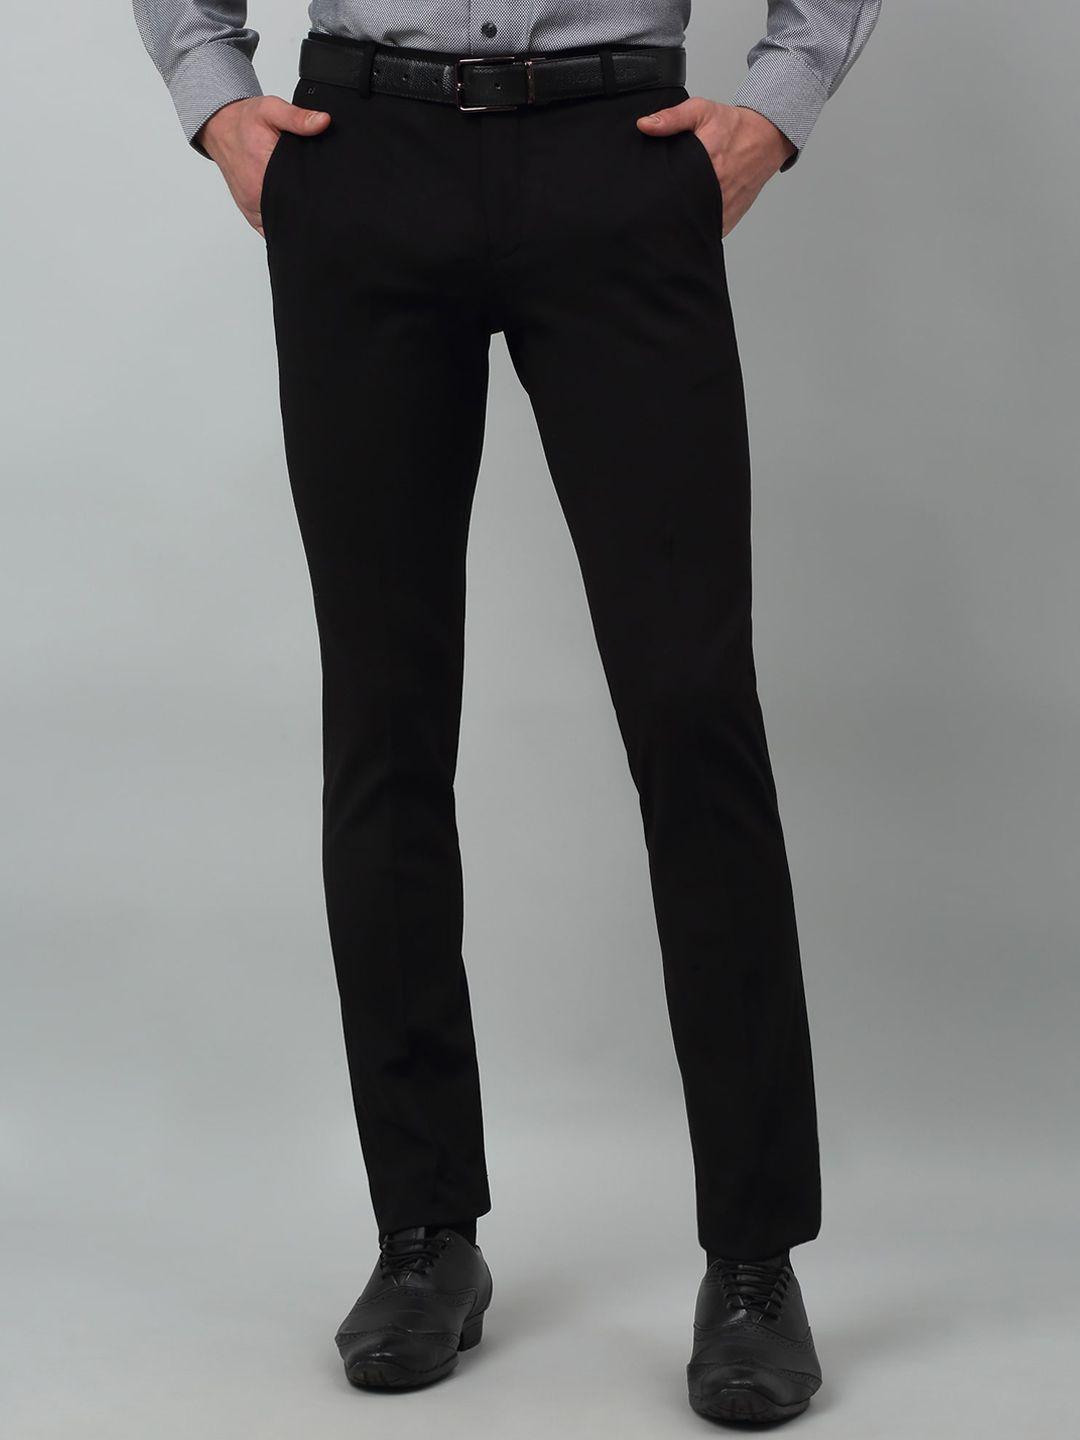 cantabil-men-mid-rise-cotton-formal-trousers